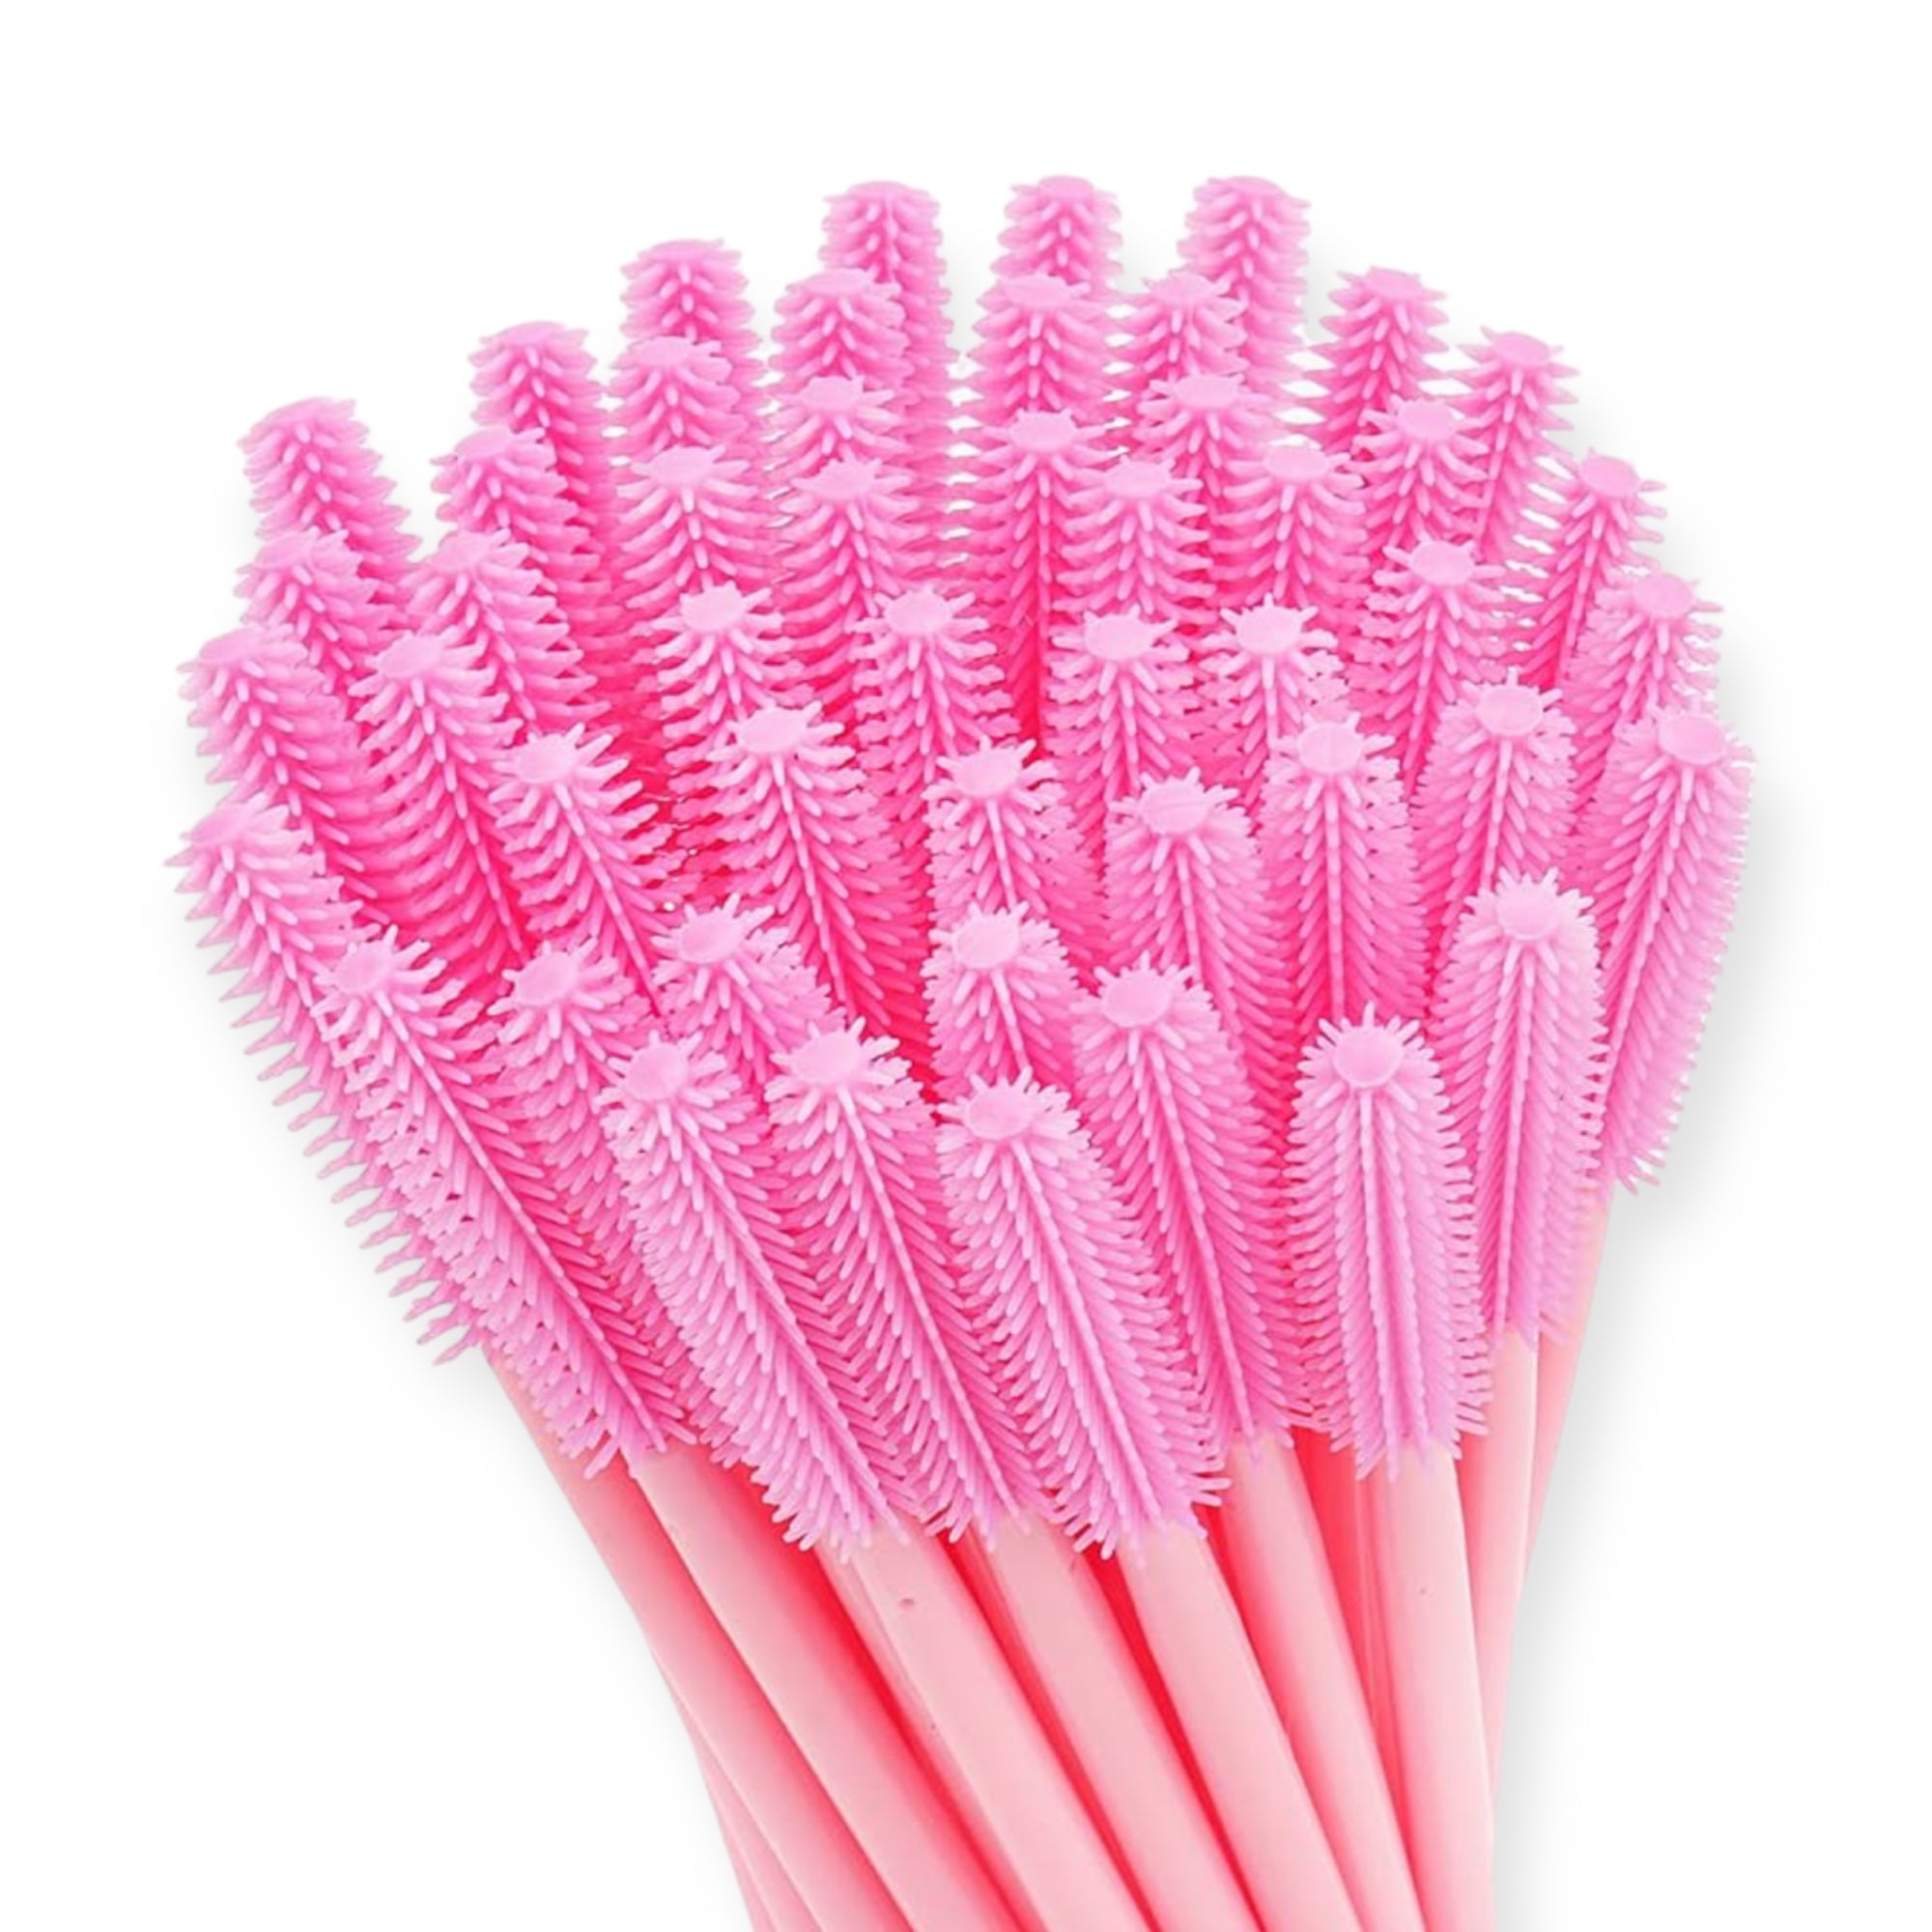 SILICONE SPOOLIE WANDS 50 PCS